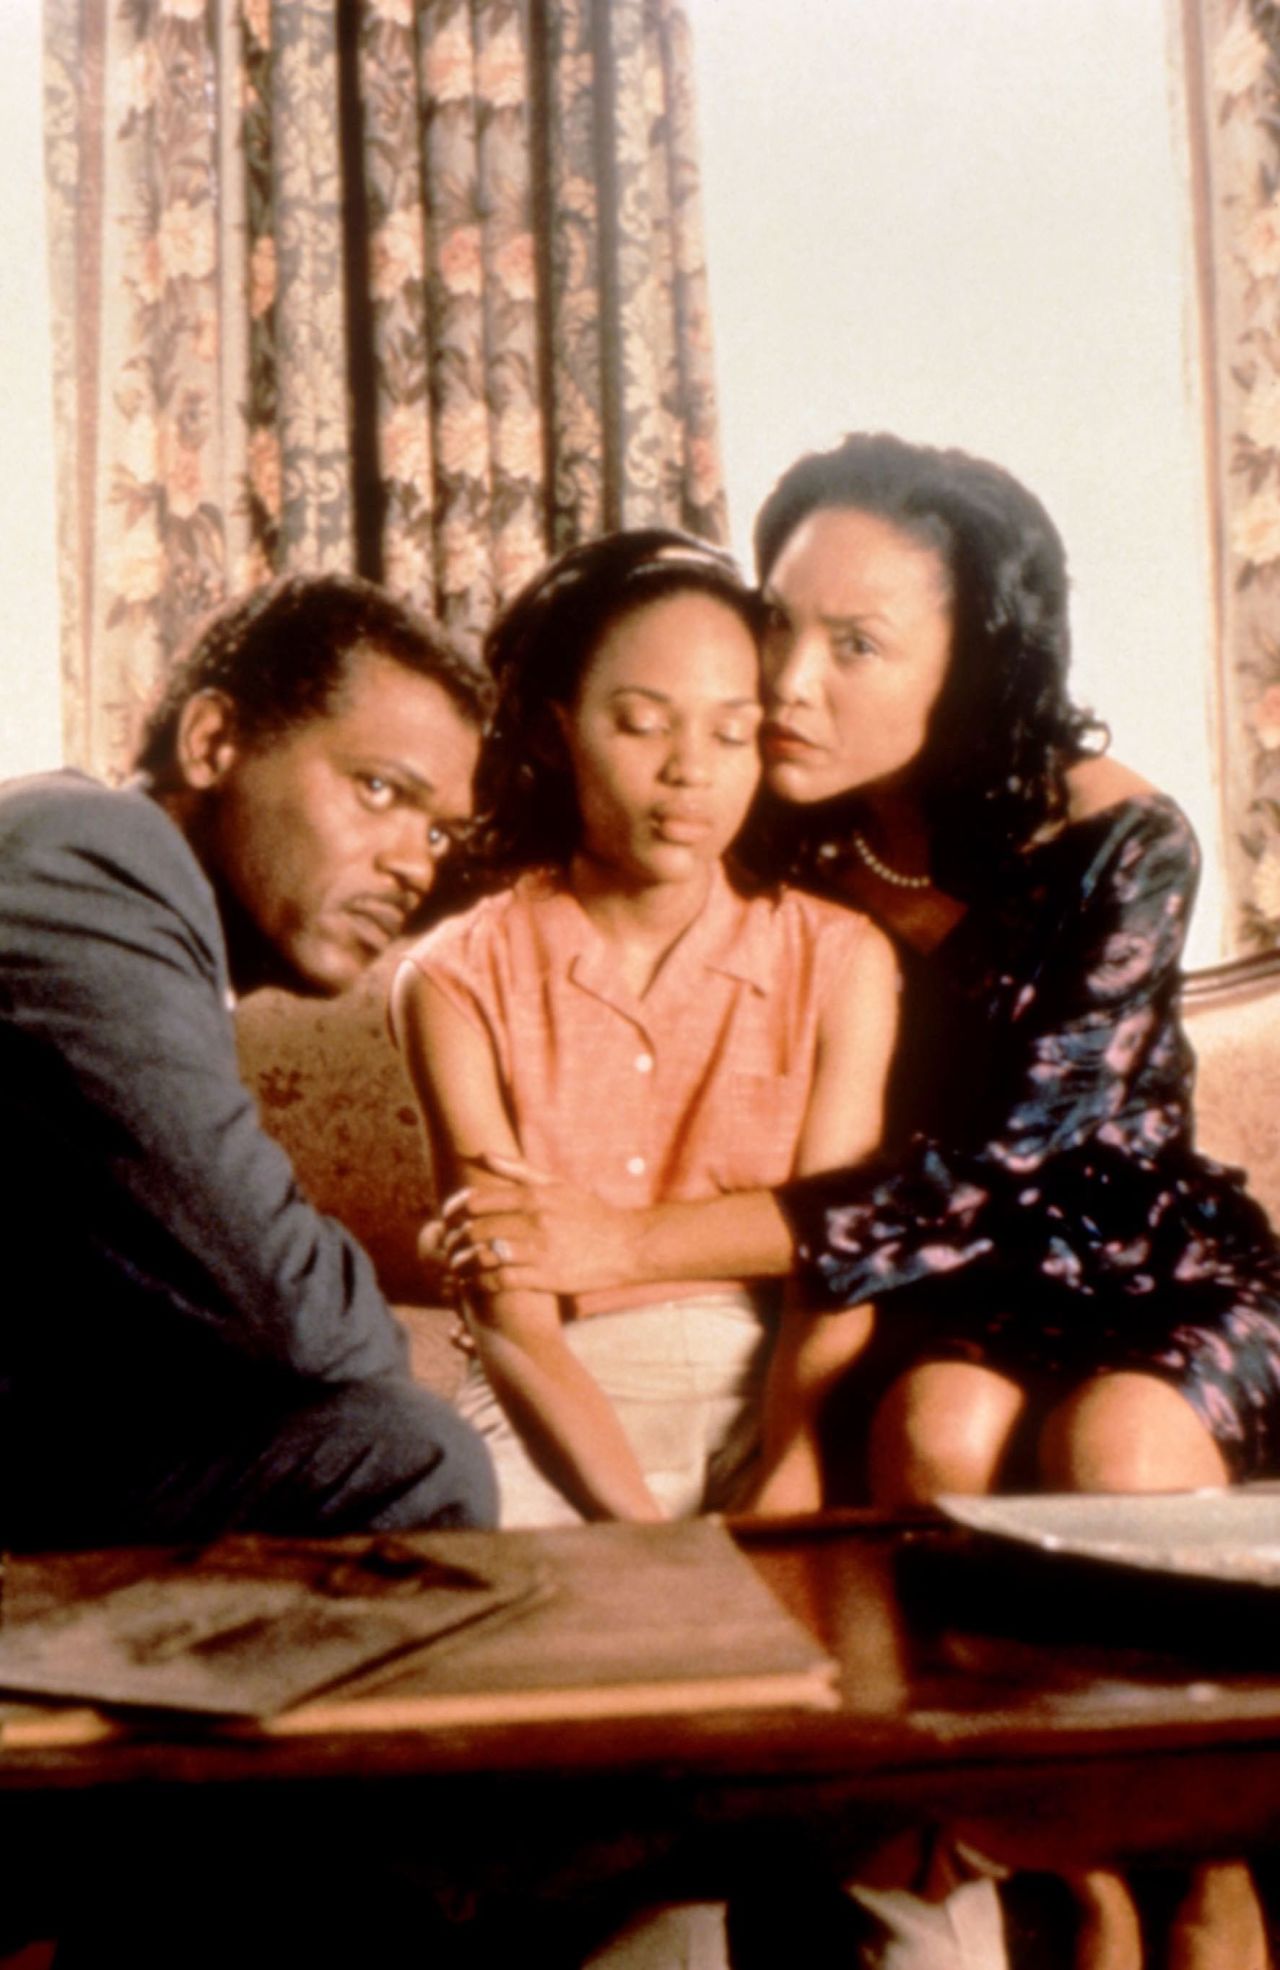 <strong>"Eve's Bayou": </strong>Secrets and lies follow a Louisiana family in this dramatic film, starring Samuel L. Jackson, Jurnee Smollett-Bell and Lynn Whitfield.<strong> (Amazon Prime, Hulu) </strong>